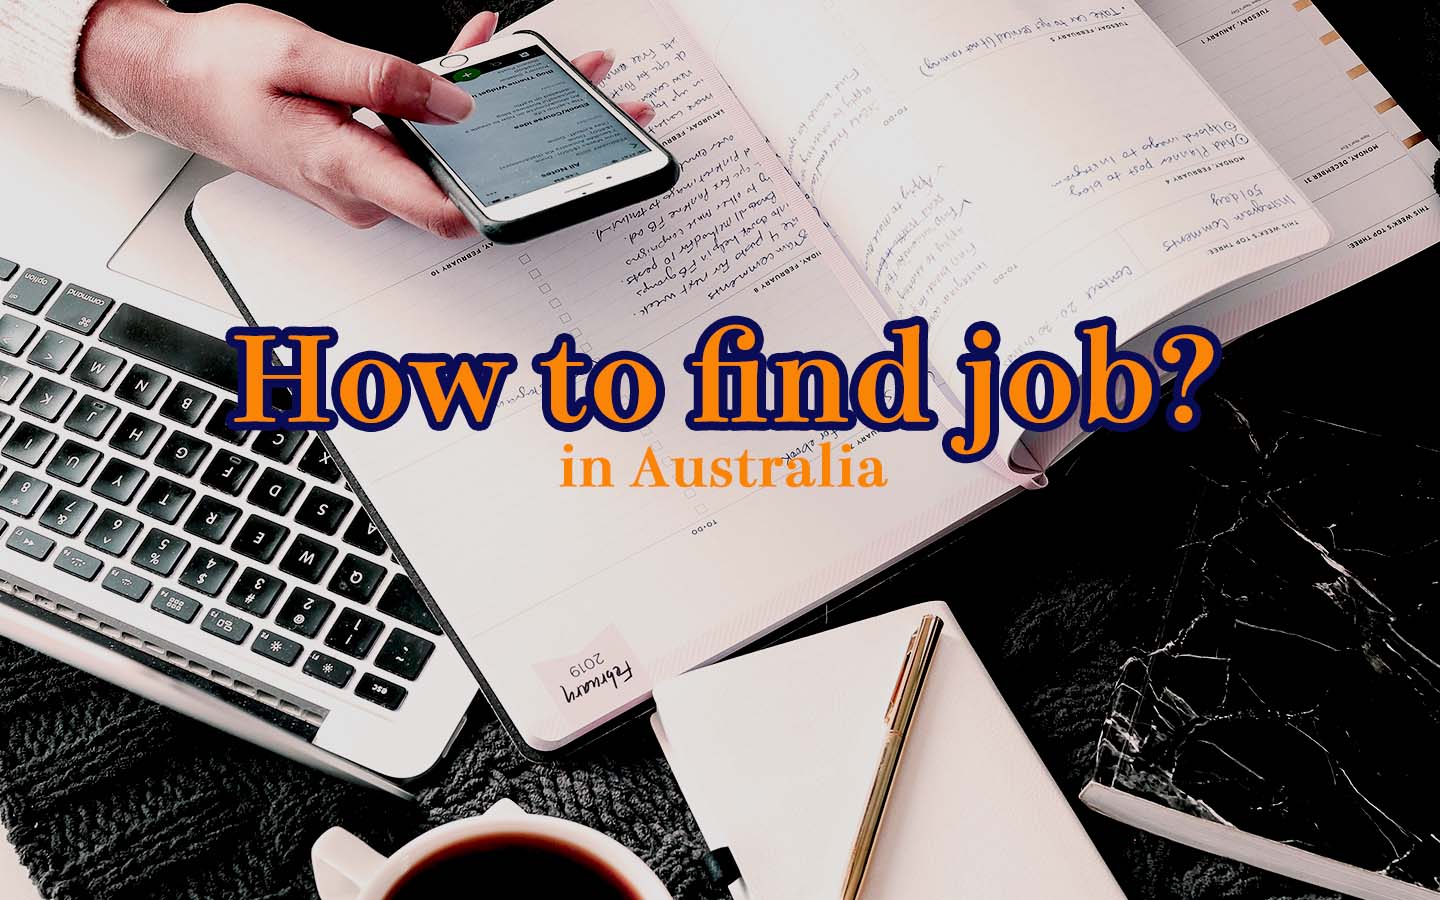 How to find job